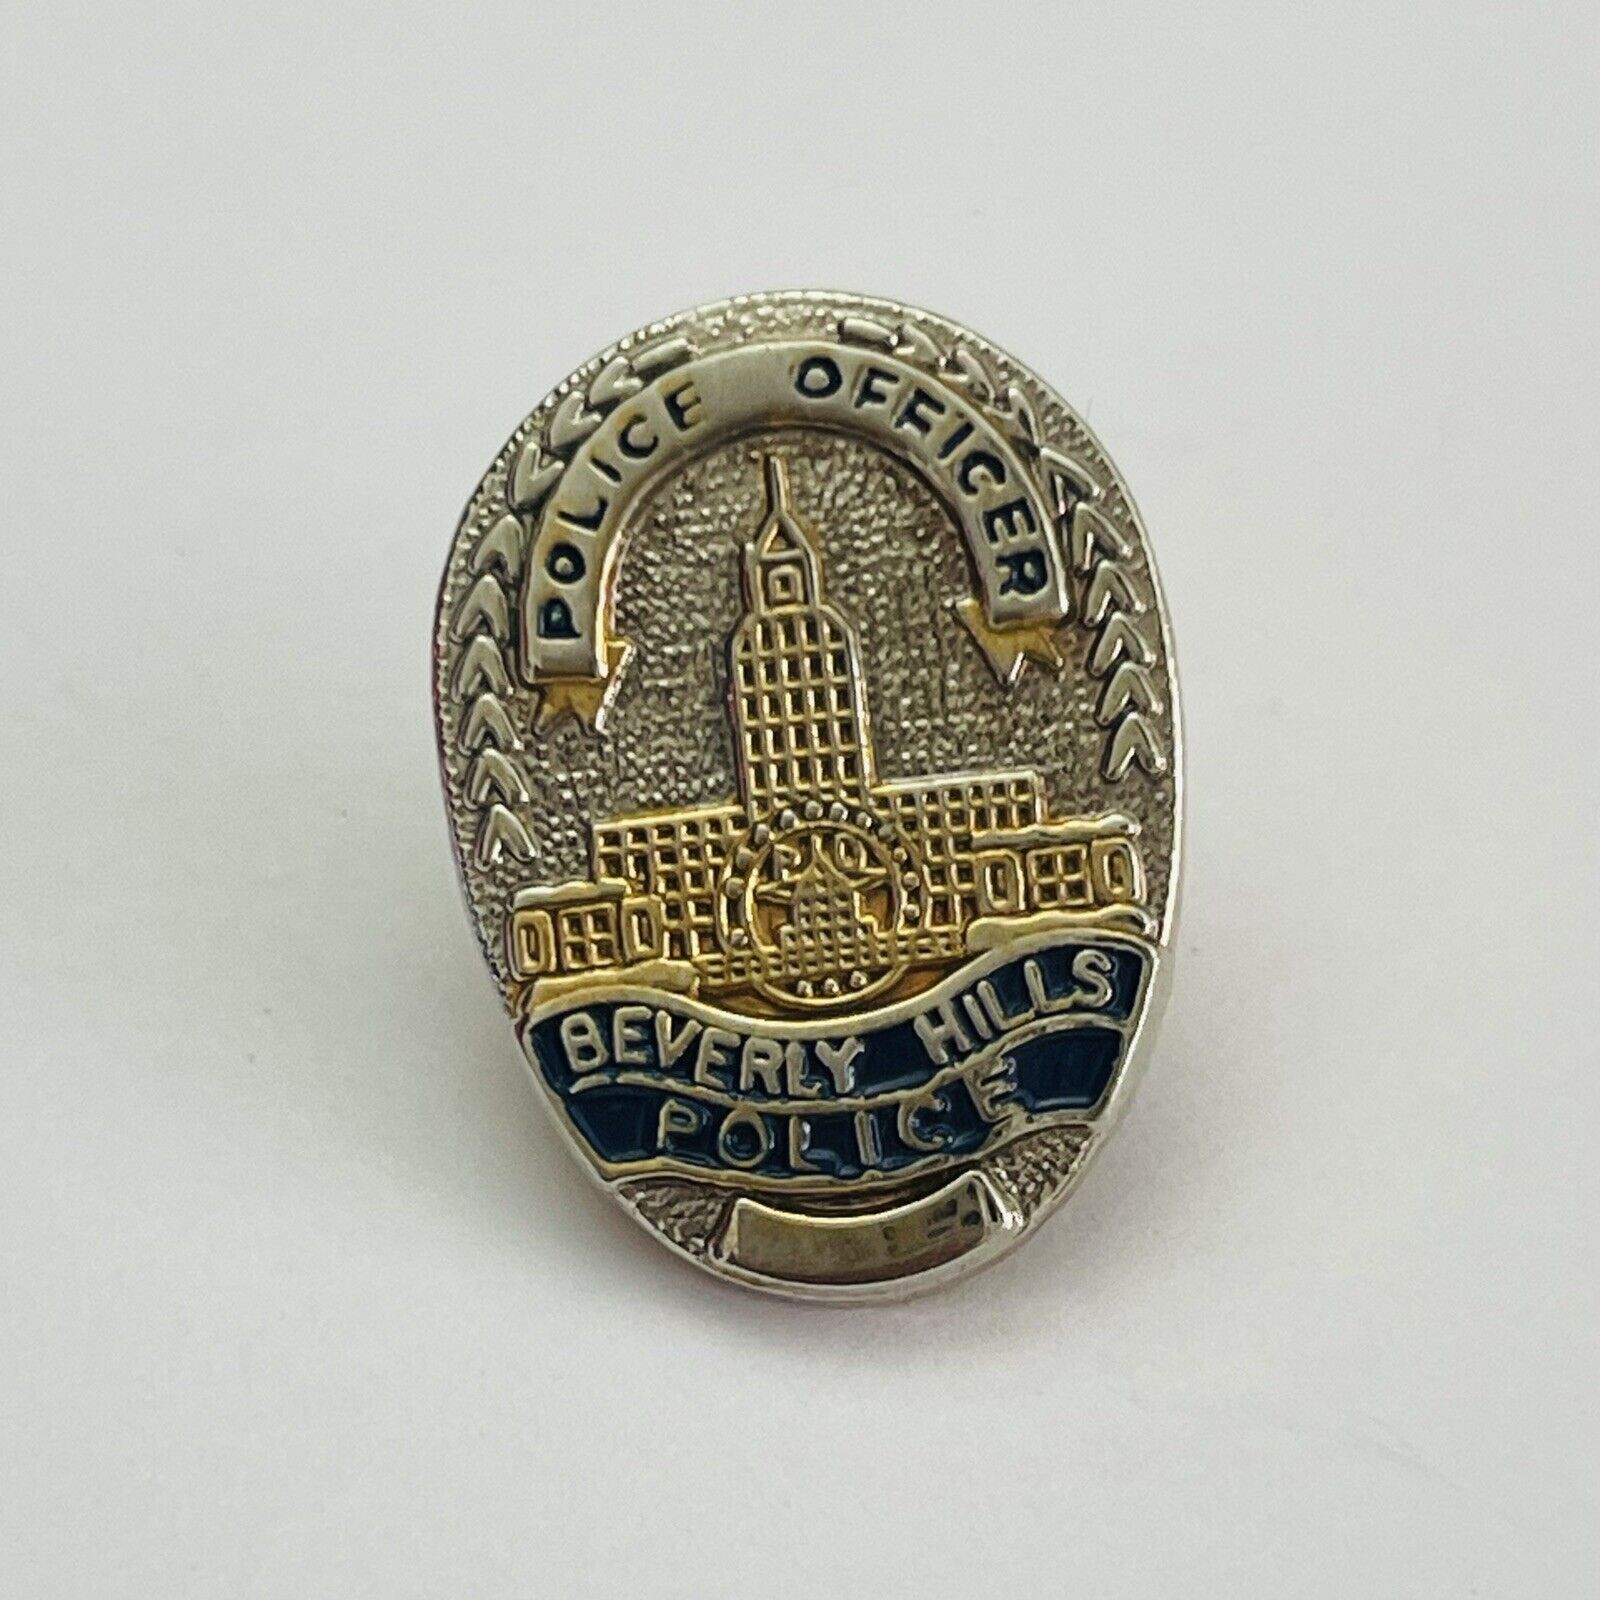 VINTAGE BEVERLY HILLS POLICE LAPEL PIN CITY VIEW 